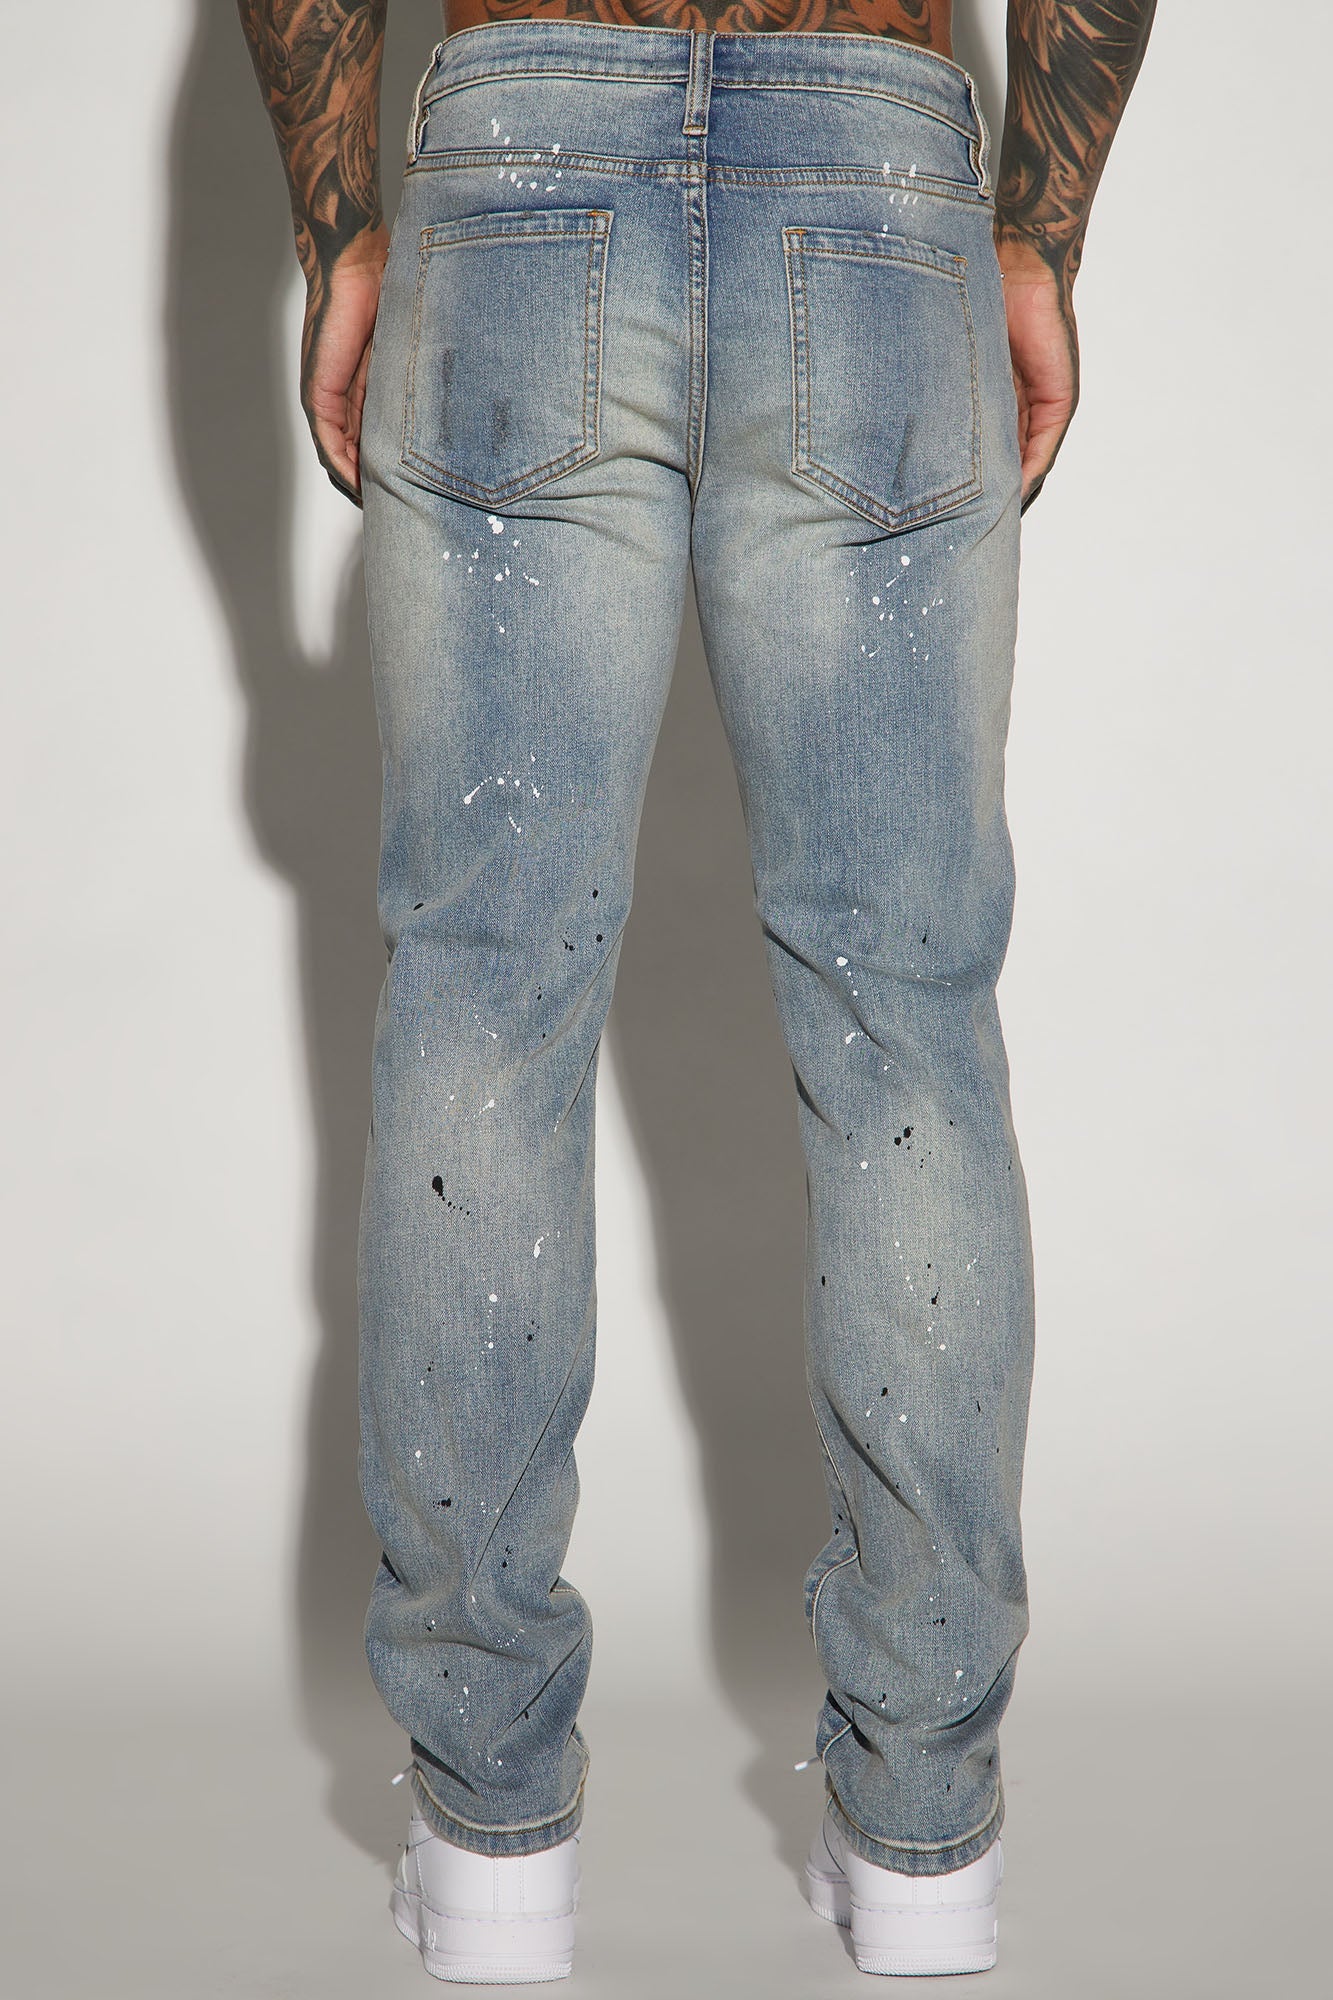 Edgy and Trendy: Ripped and Bleach Splatter Slim Jeans in Light Blue Wash